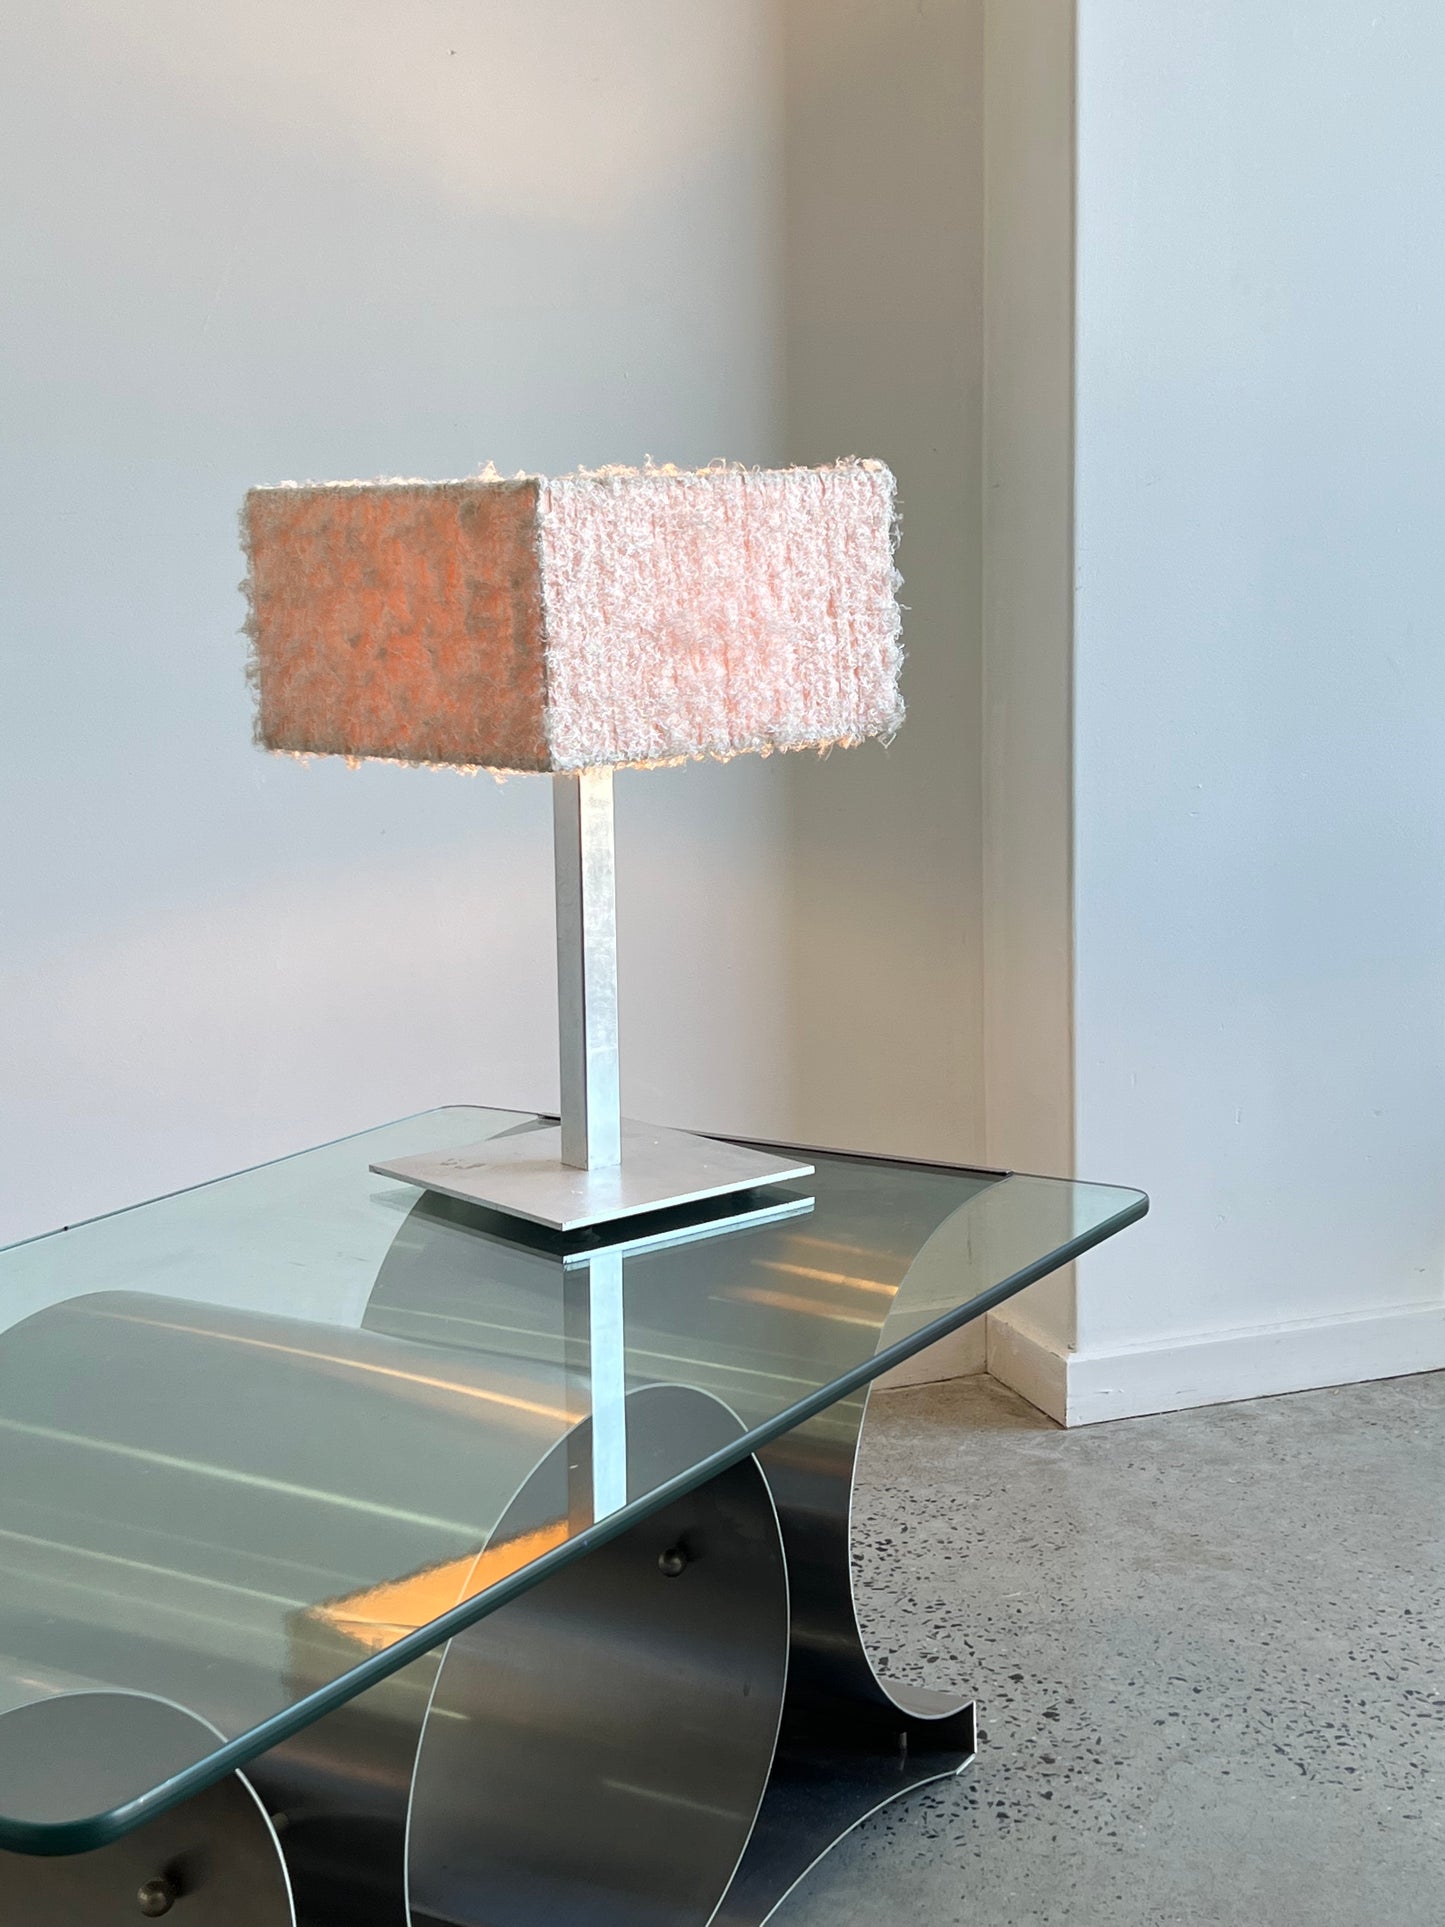 Italian Square Steel Base Table Lamp and Synthetic Shade, 1980s